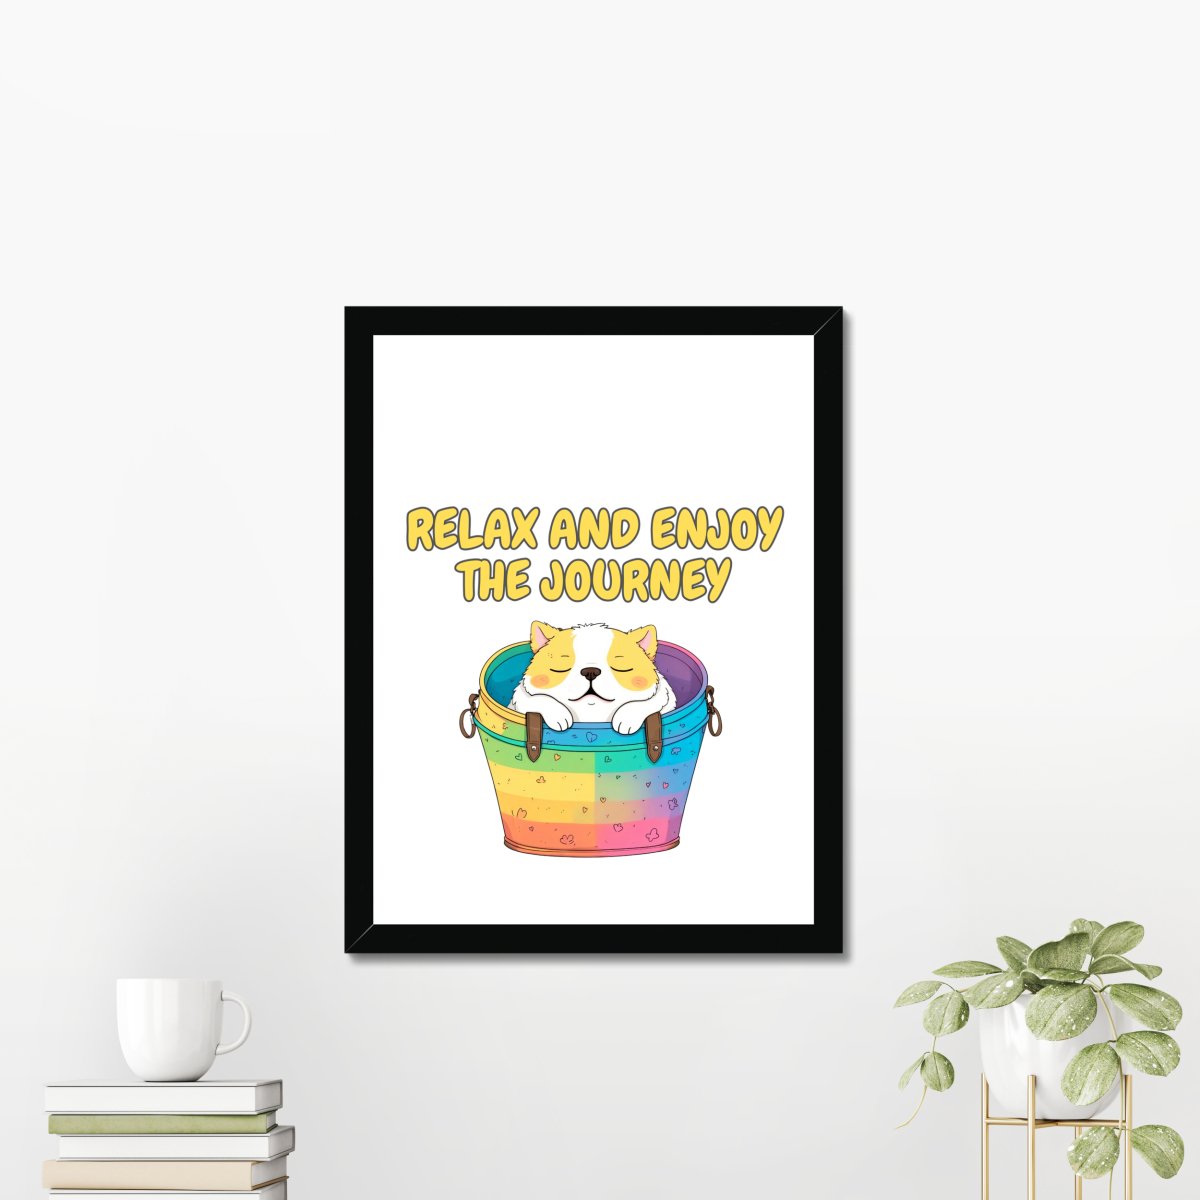 Enjoy the journey - Art print - Poster - Ever colorful